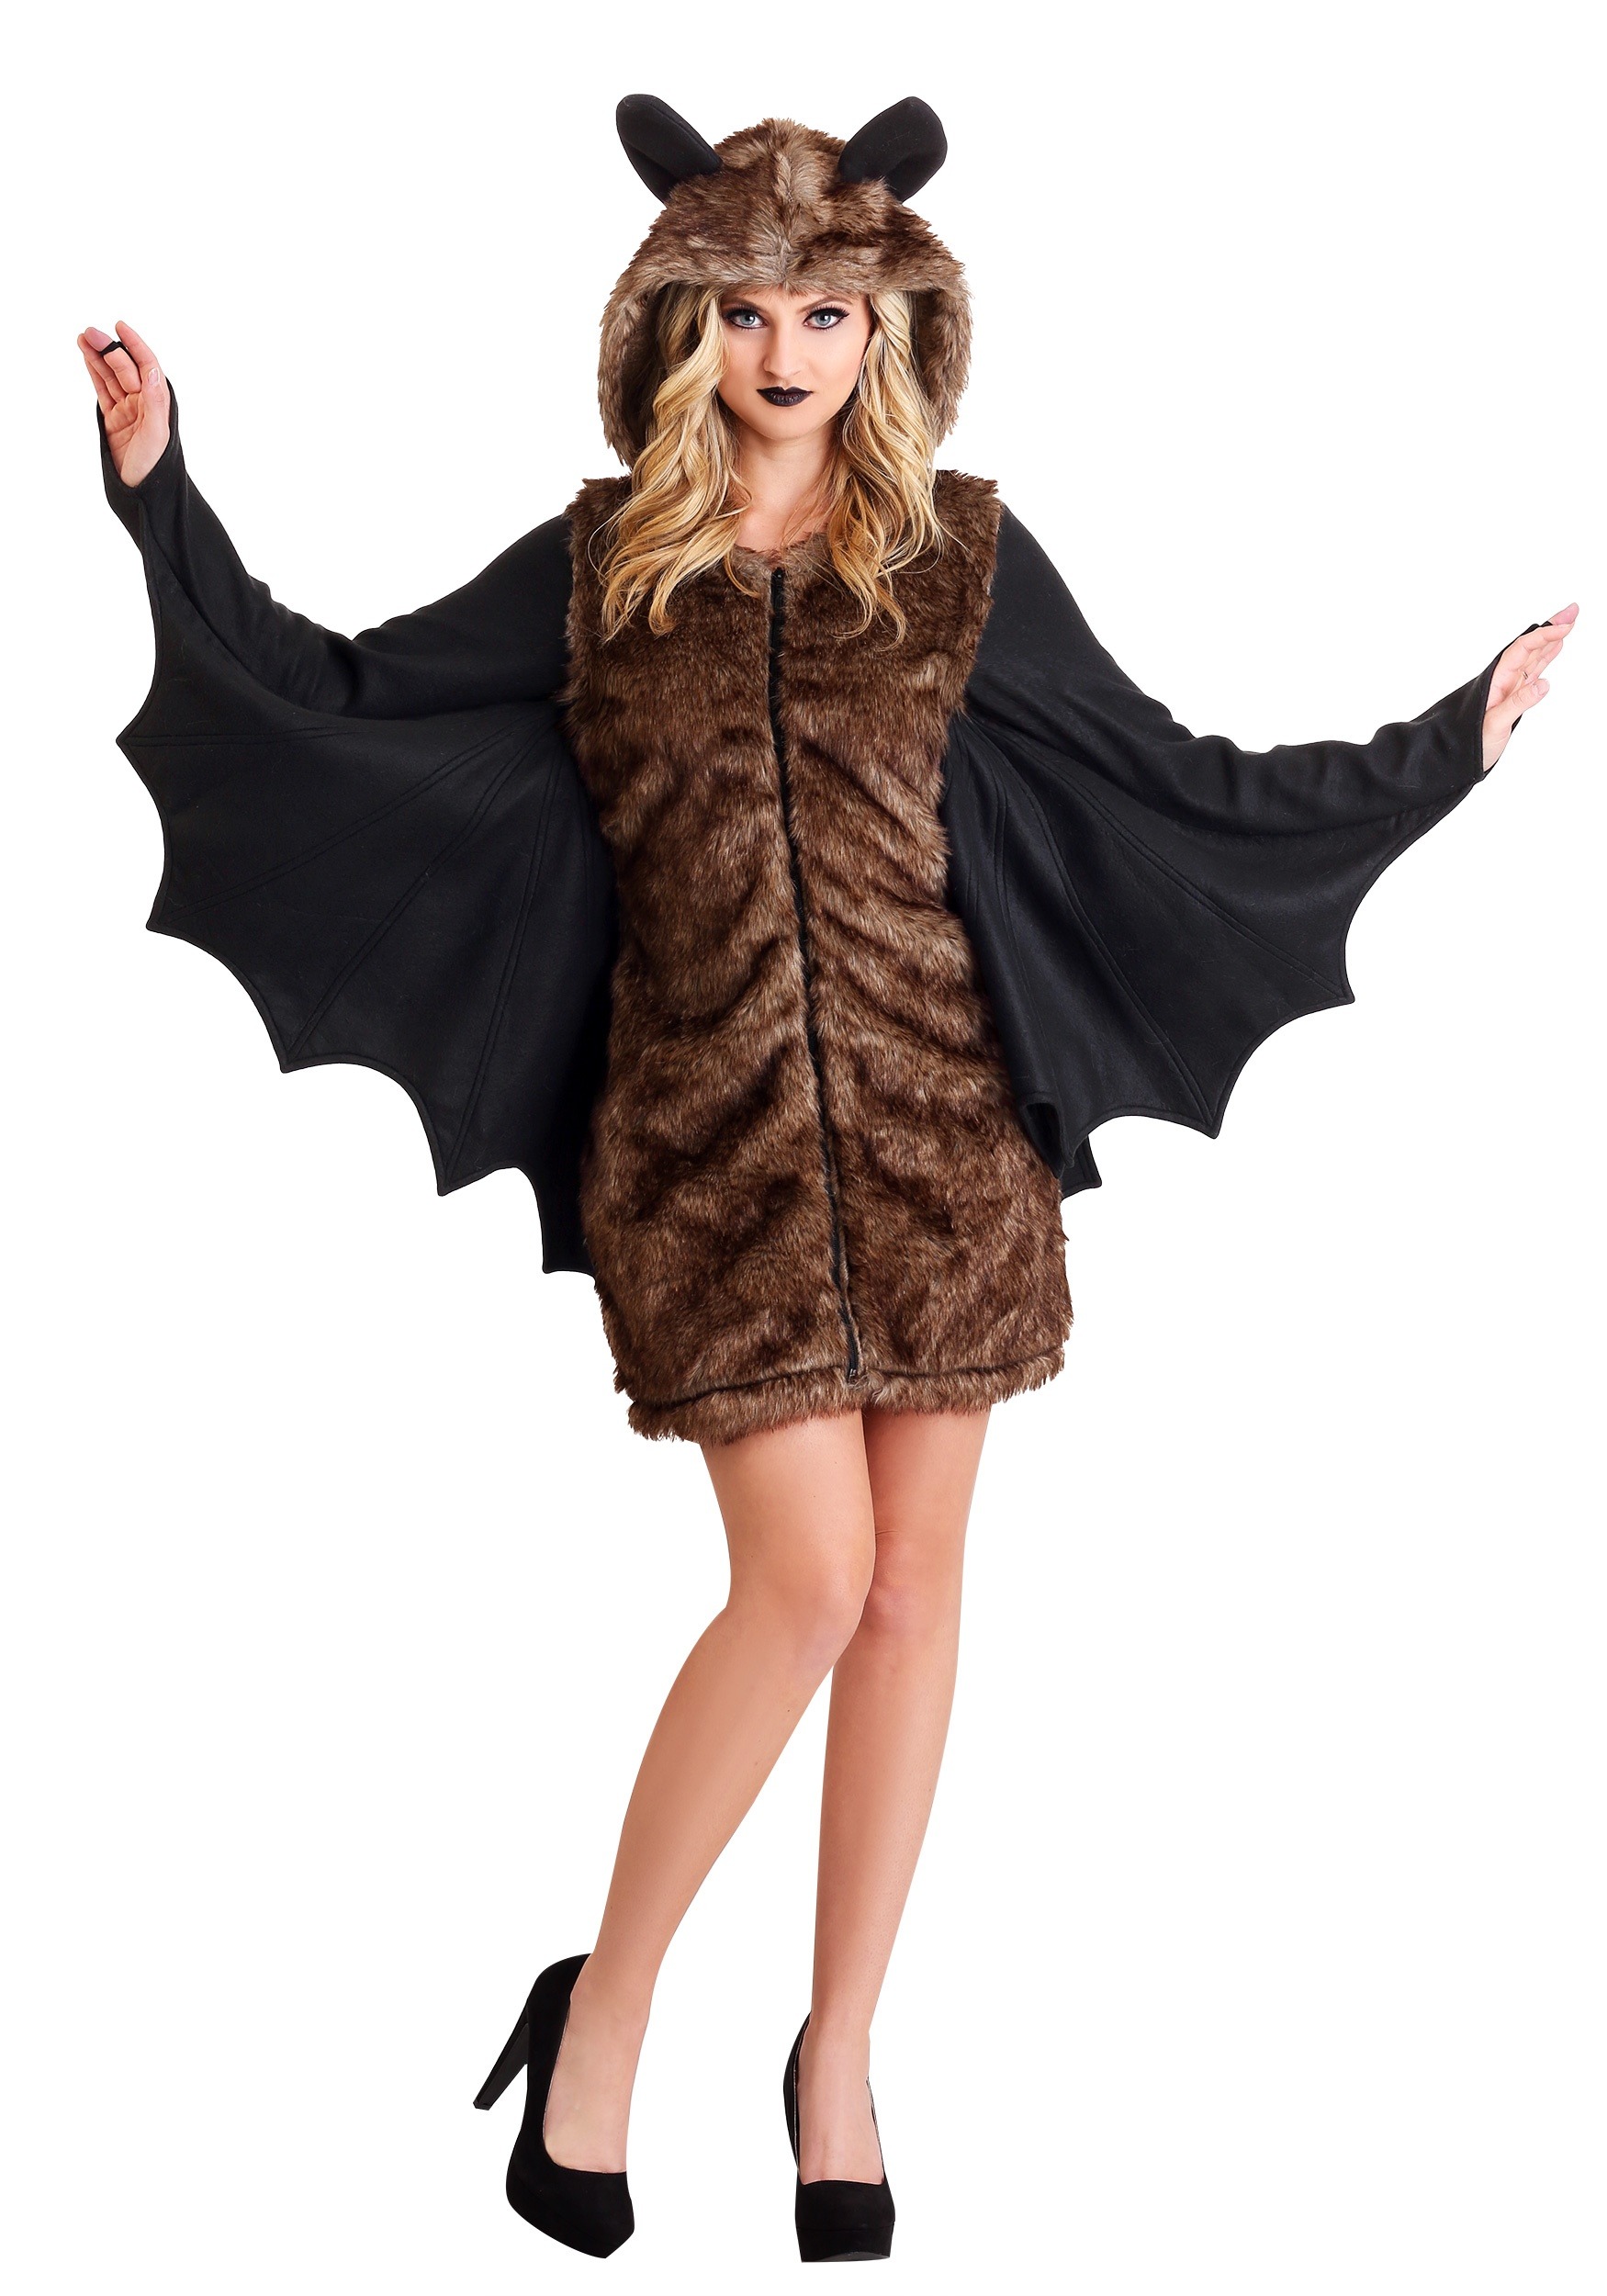 Image of Deluxe Women's Bat Costume | Adult Animal Costumes ID FUN4067AD-L